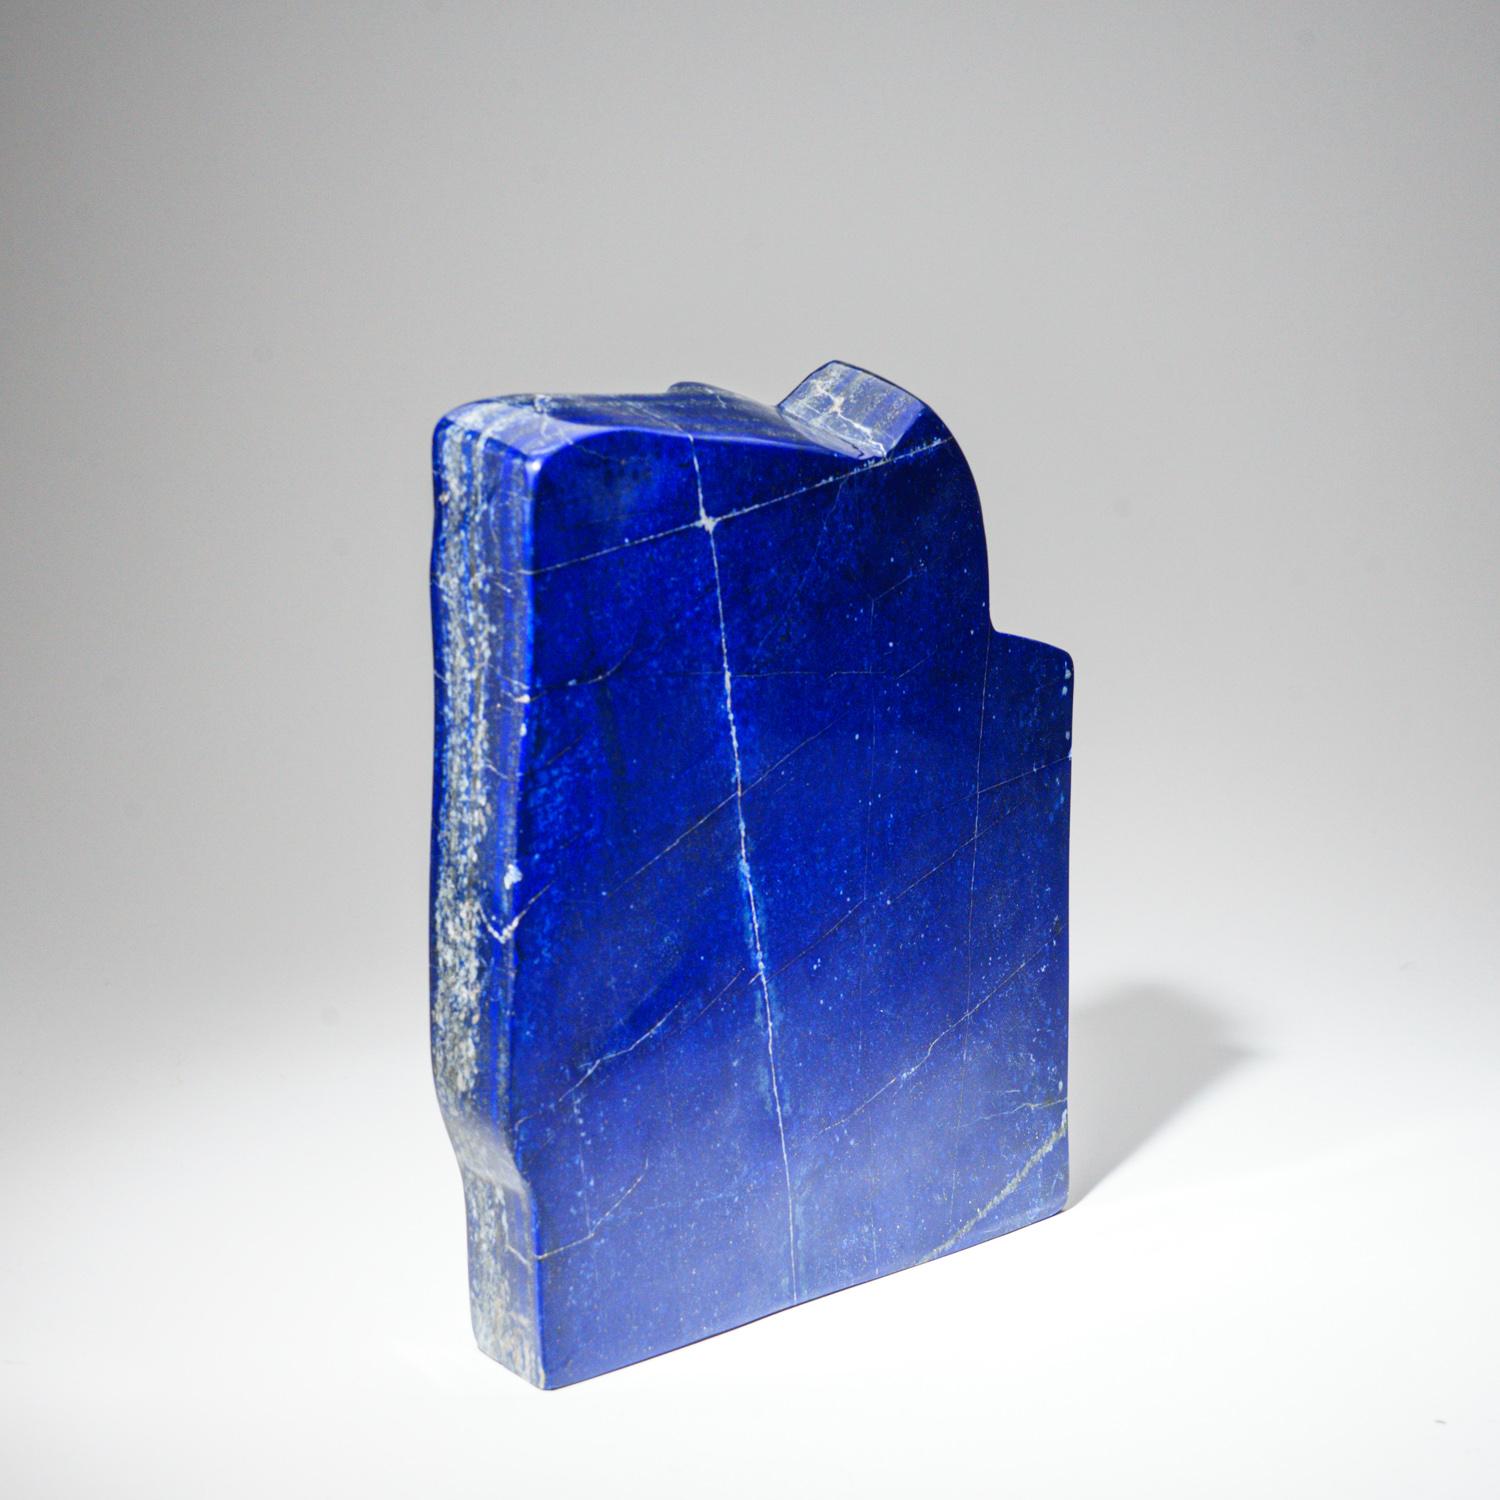 Beautiful hand-polished free form of AAA quality natural Afghani lapis lazuli.  This specimen has rich, electric-royal blue color enriched with scintillating pyrite micro-crystals.

Lapis Lazuli is a powerful crystal for activating the higher mind